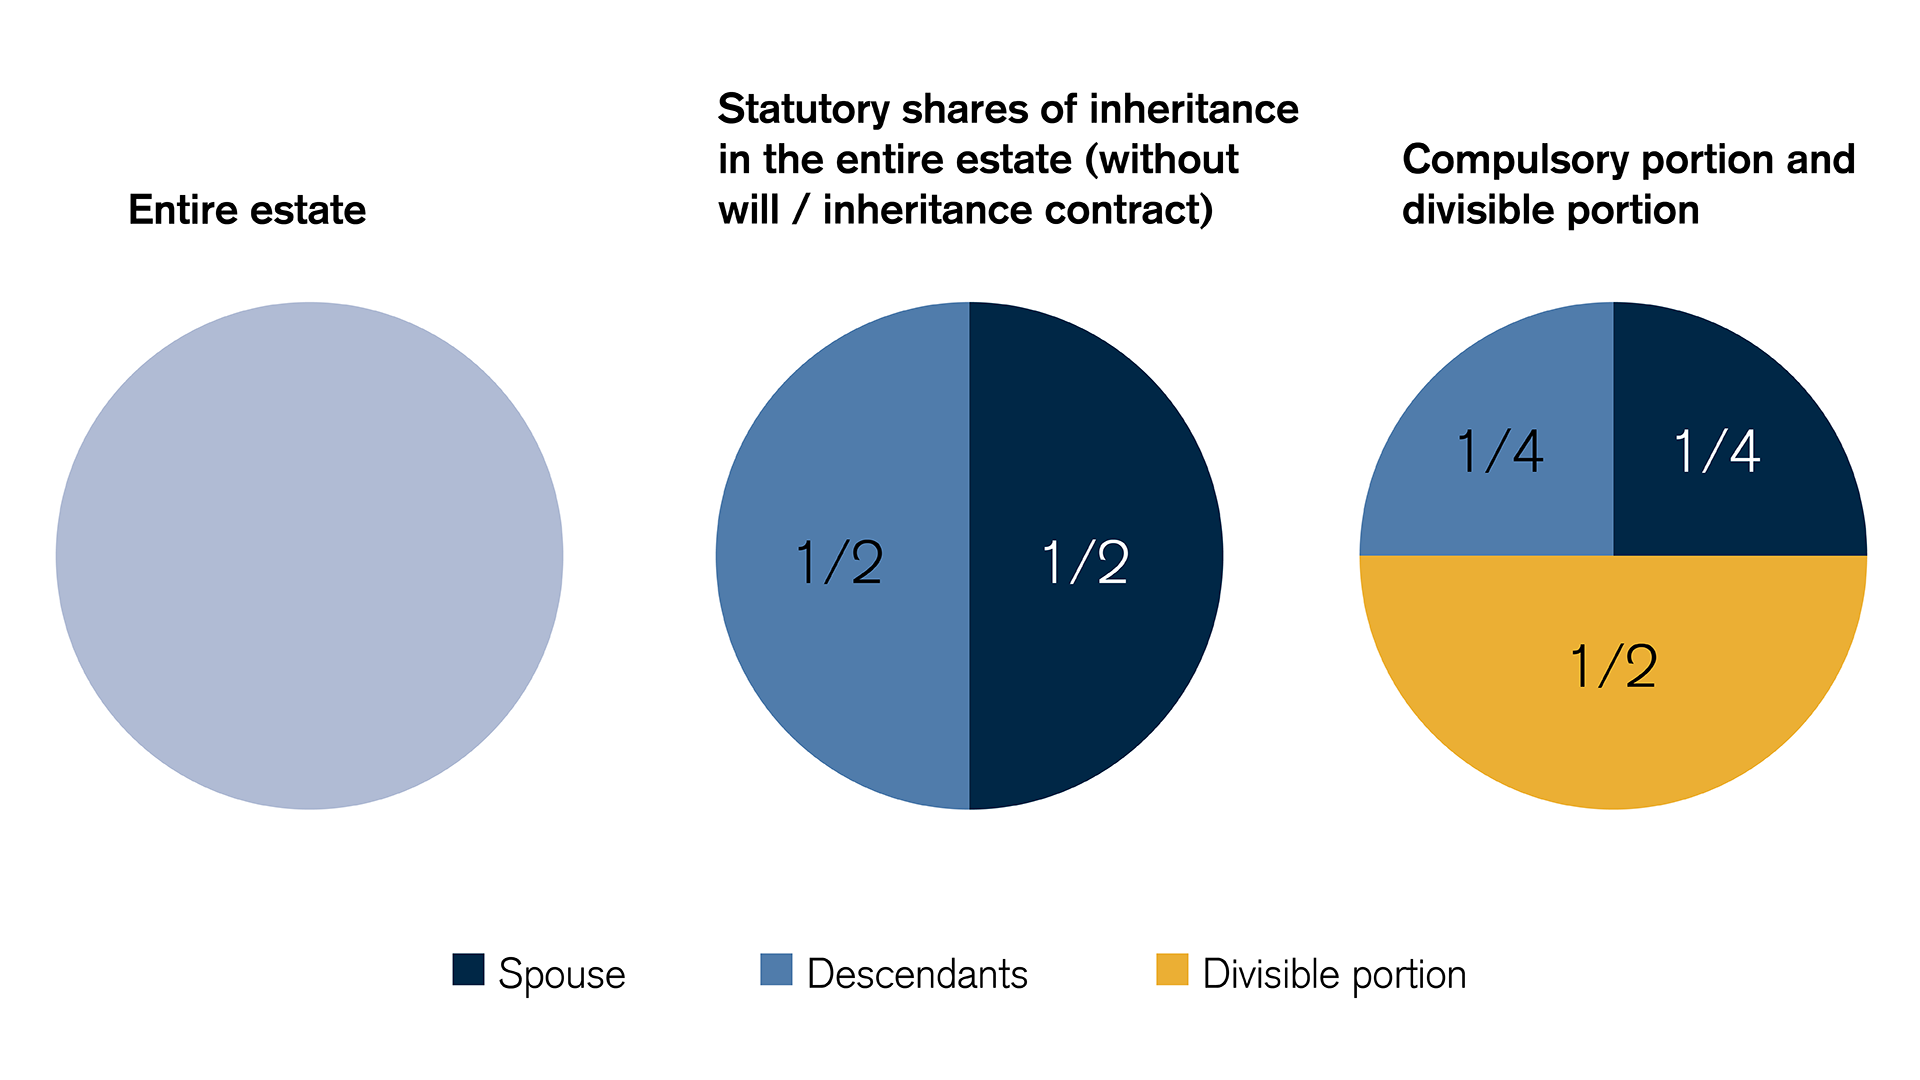 Distribution of an estate into share of inheritance, compulsory portion, and divisible portion